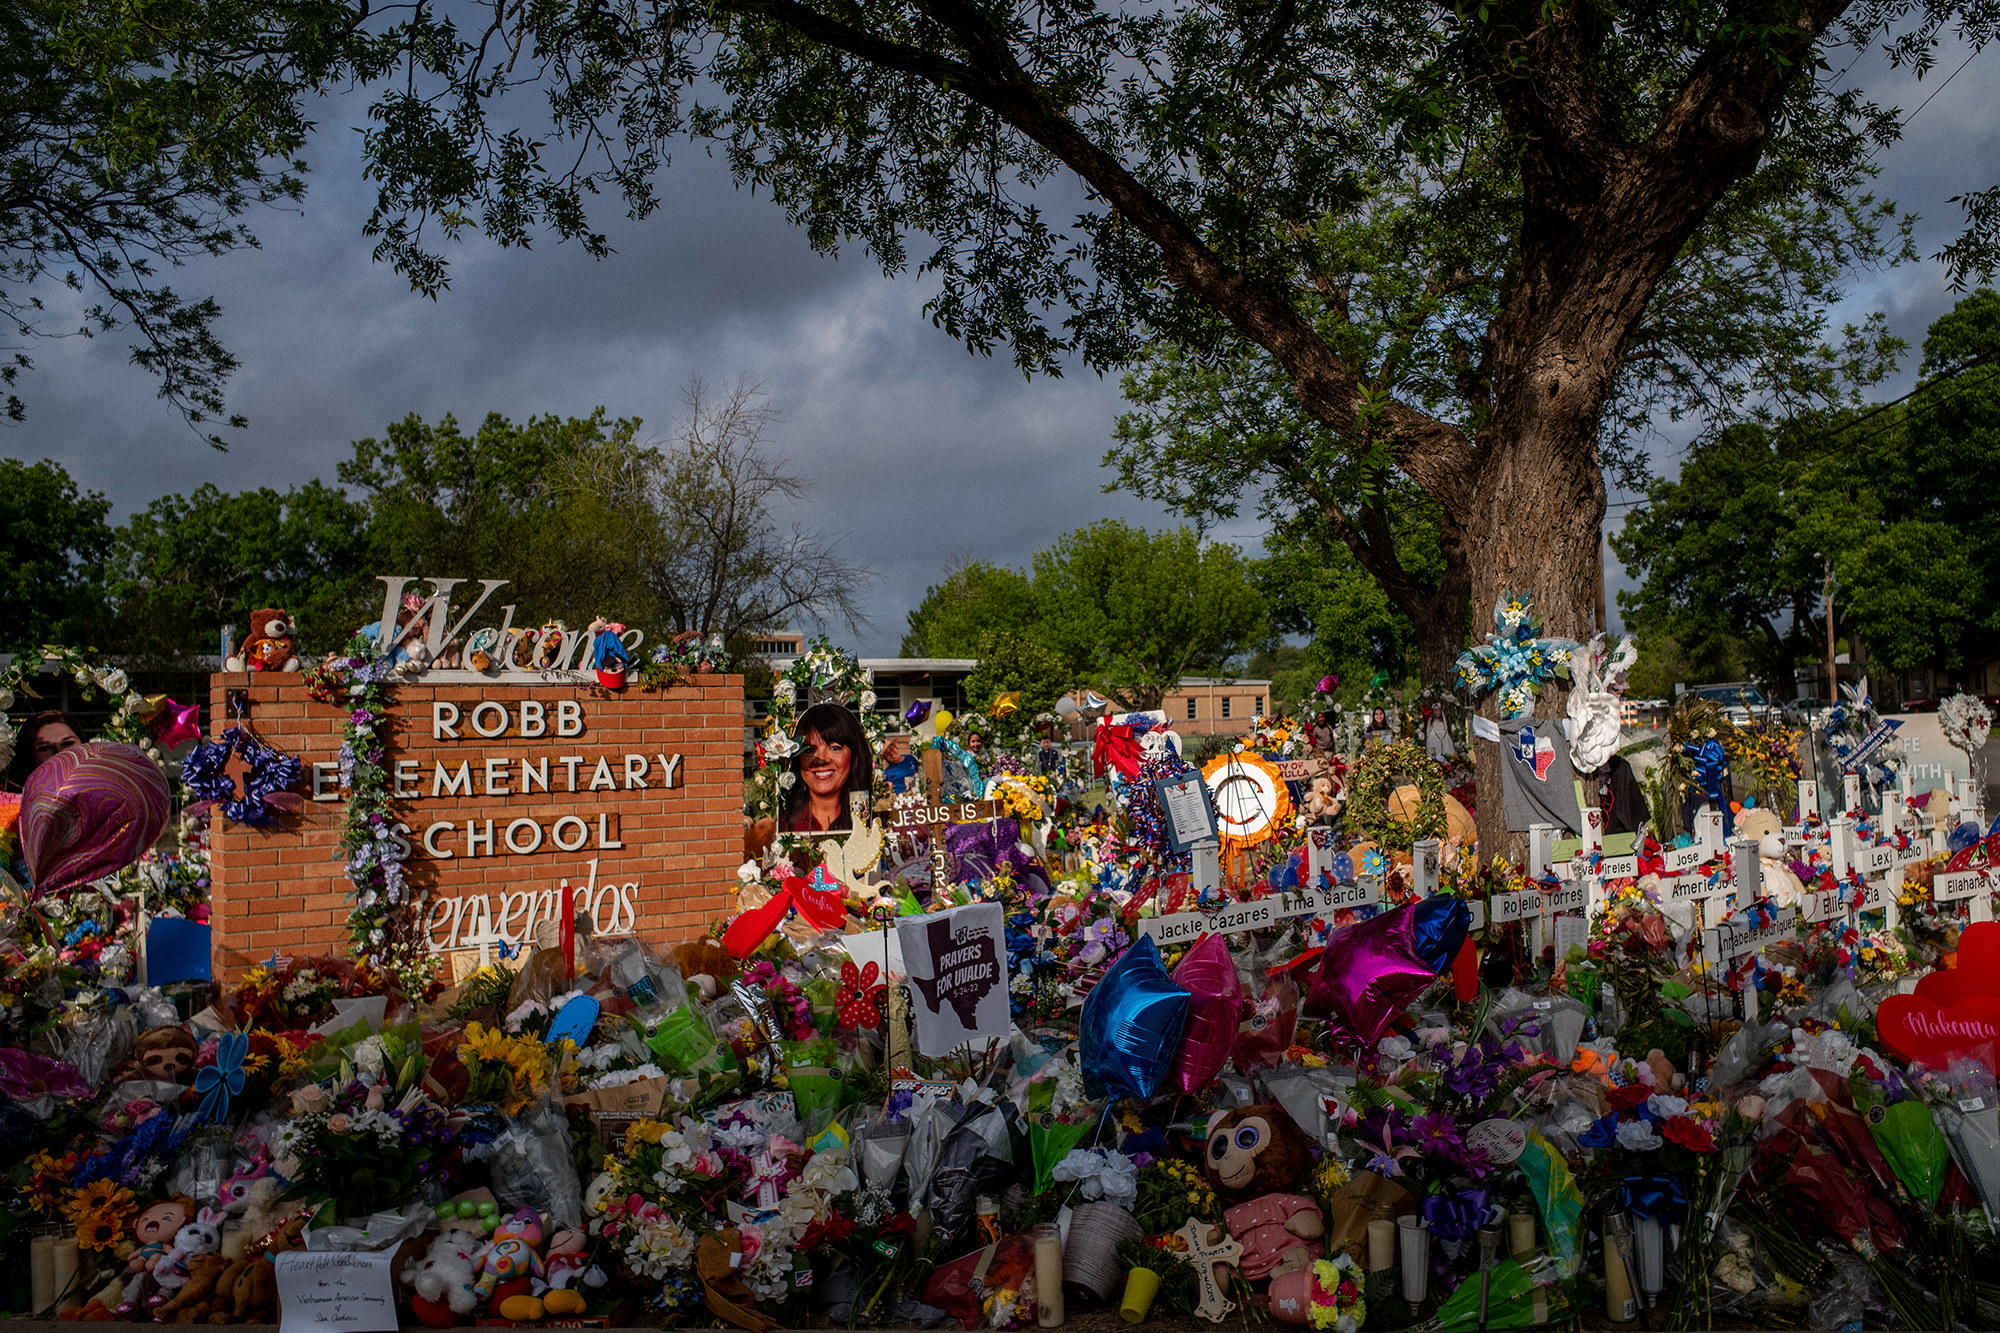 A photo of a memorial to the victims of the Robb Elementary School shooting in Uvalde, Texas